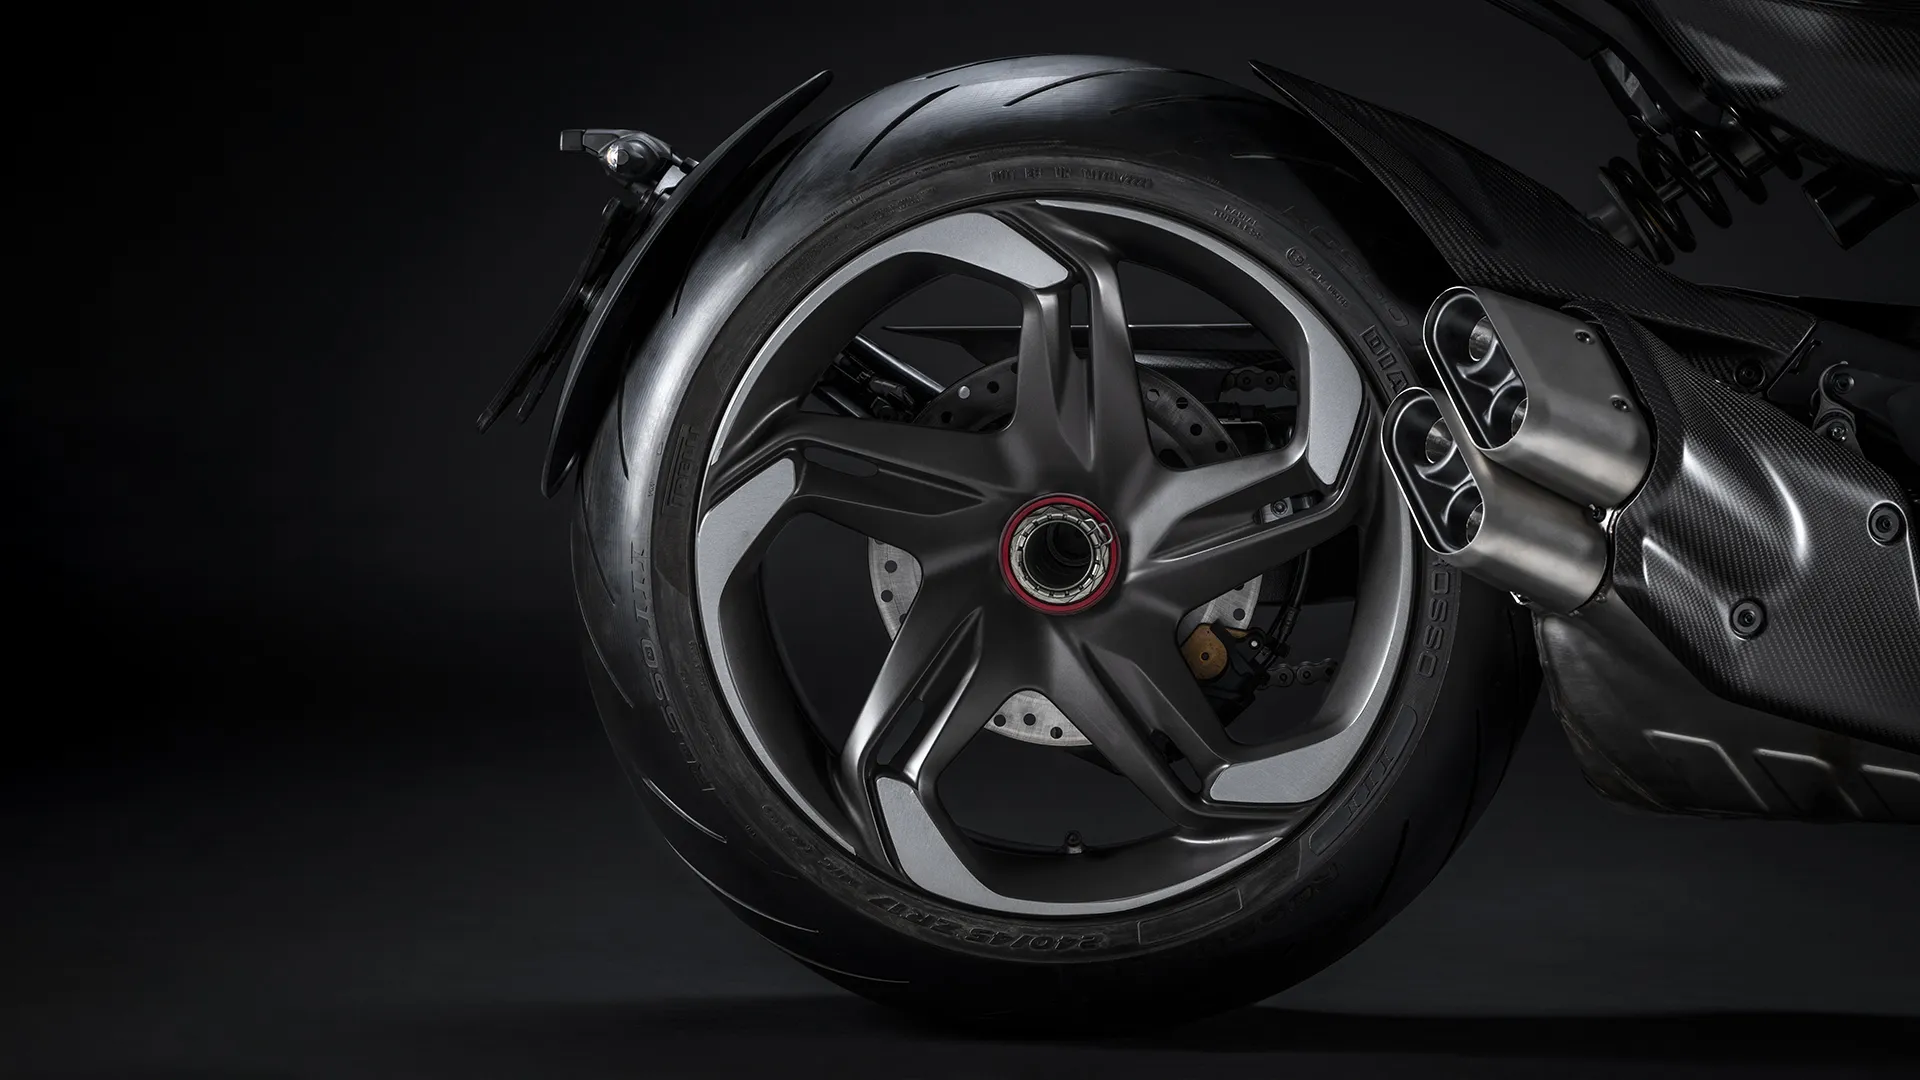 Ducati-Diavel-V4-for-Bentley-DWP24-Overview-gallery-1920x1080-02